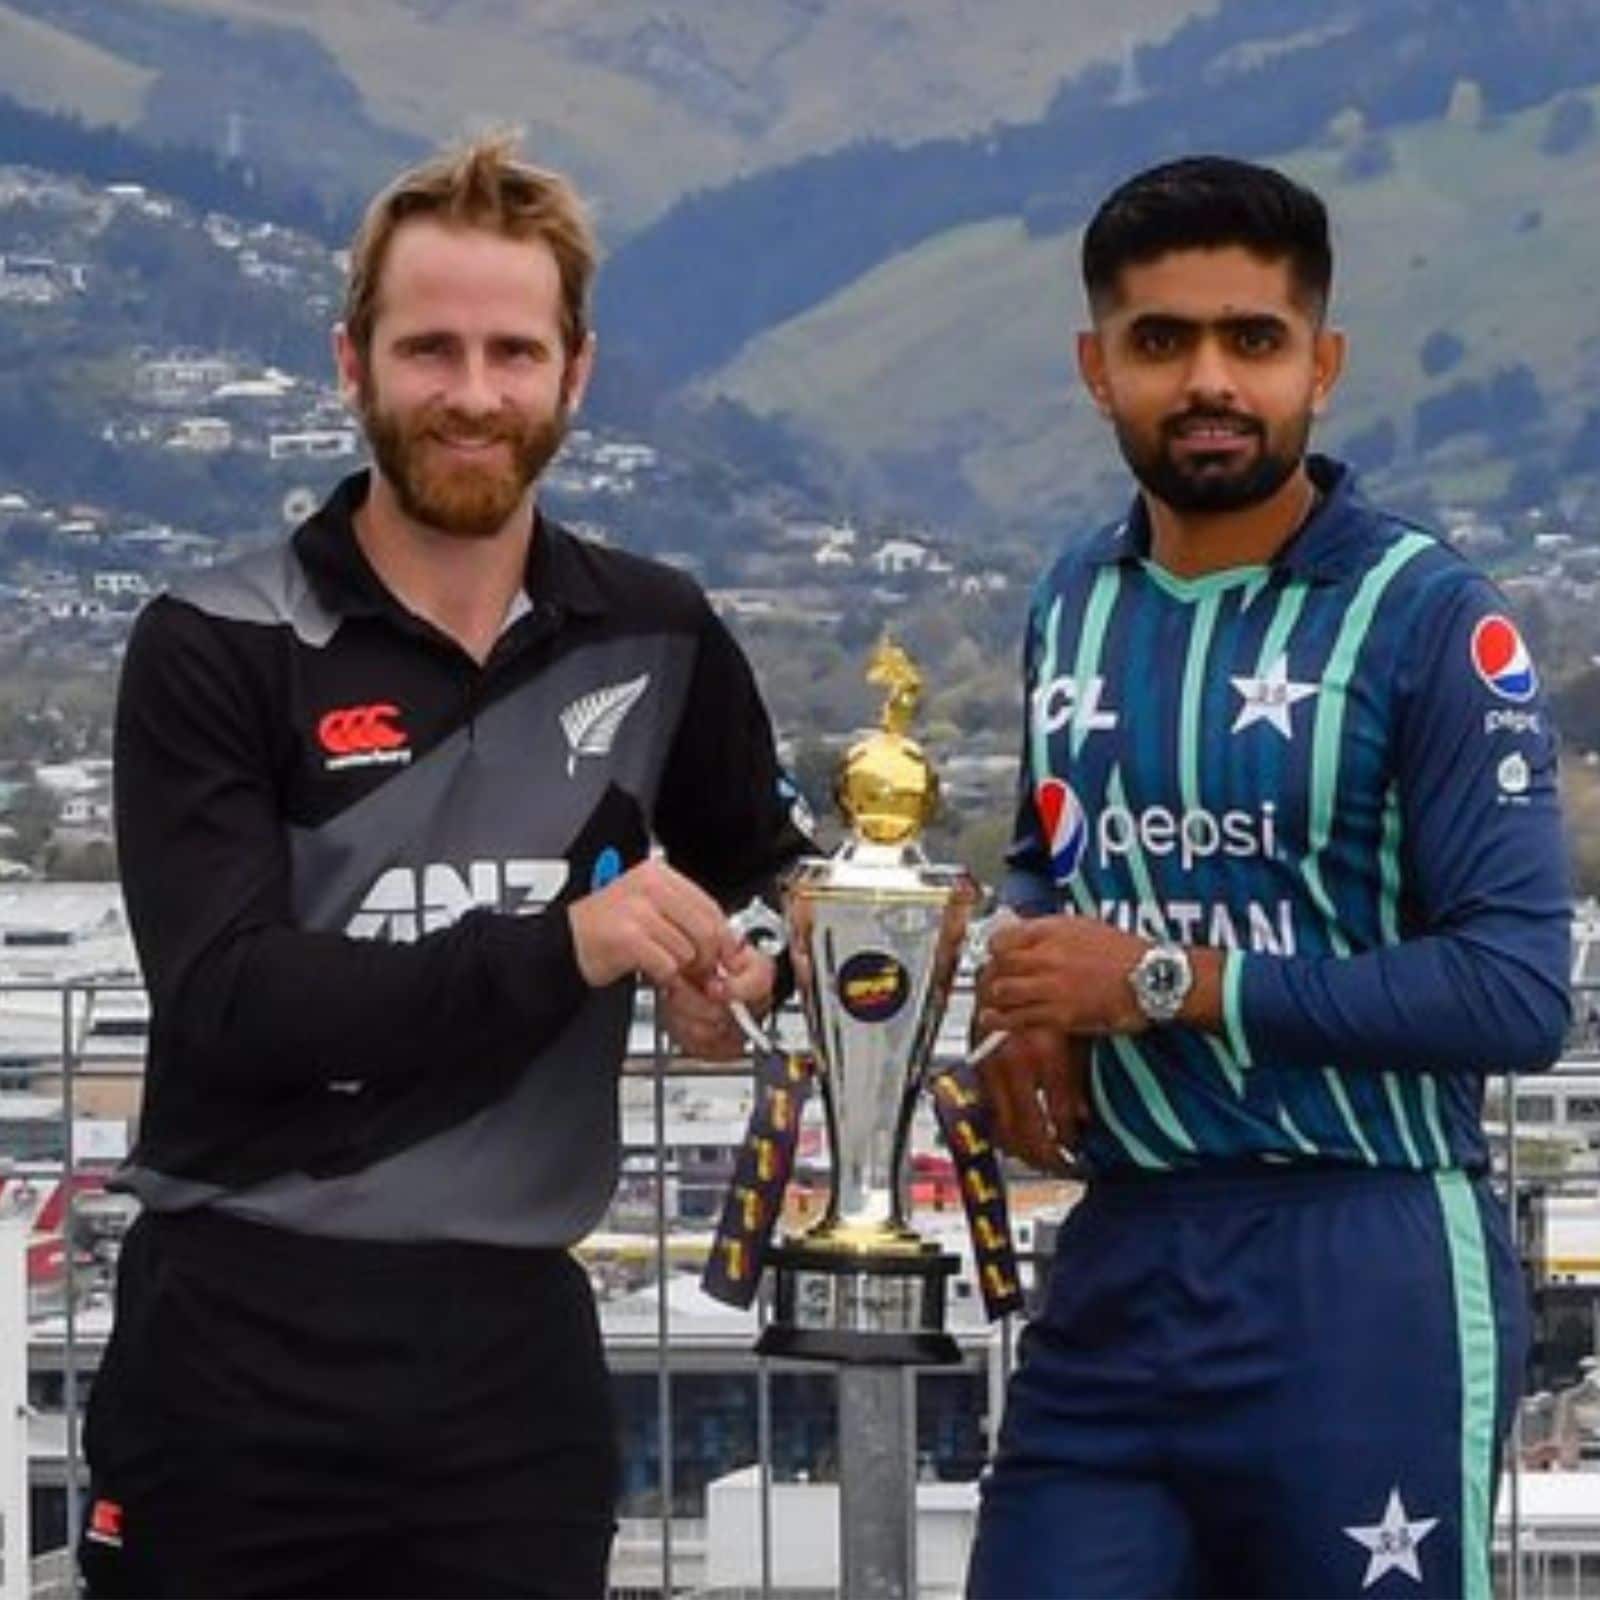 PAK vs NZ Dream11 Team Prediction Pakistan vs New Zealand Check Captain, Vice-Captain, and Probable Playing XIs for T20I Tri-Series PAK vs NZ match, October 11, Hagley Oval Christchurch, 730 am IST -